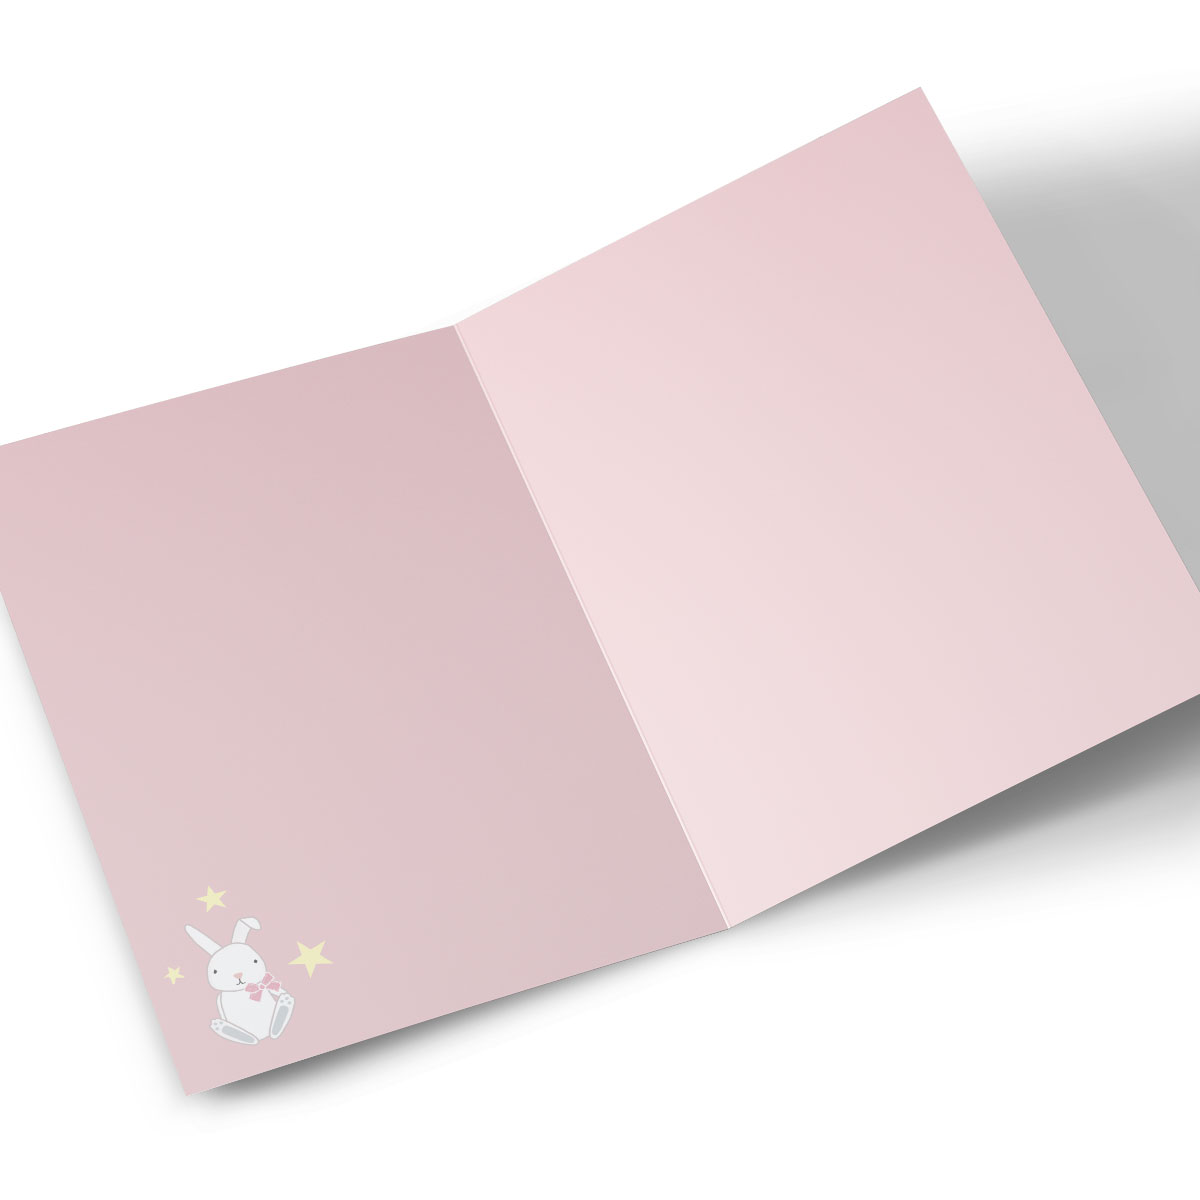 Photo New Baby Card - Pink Mobile